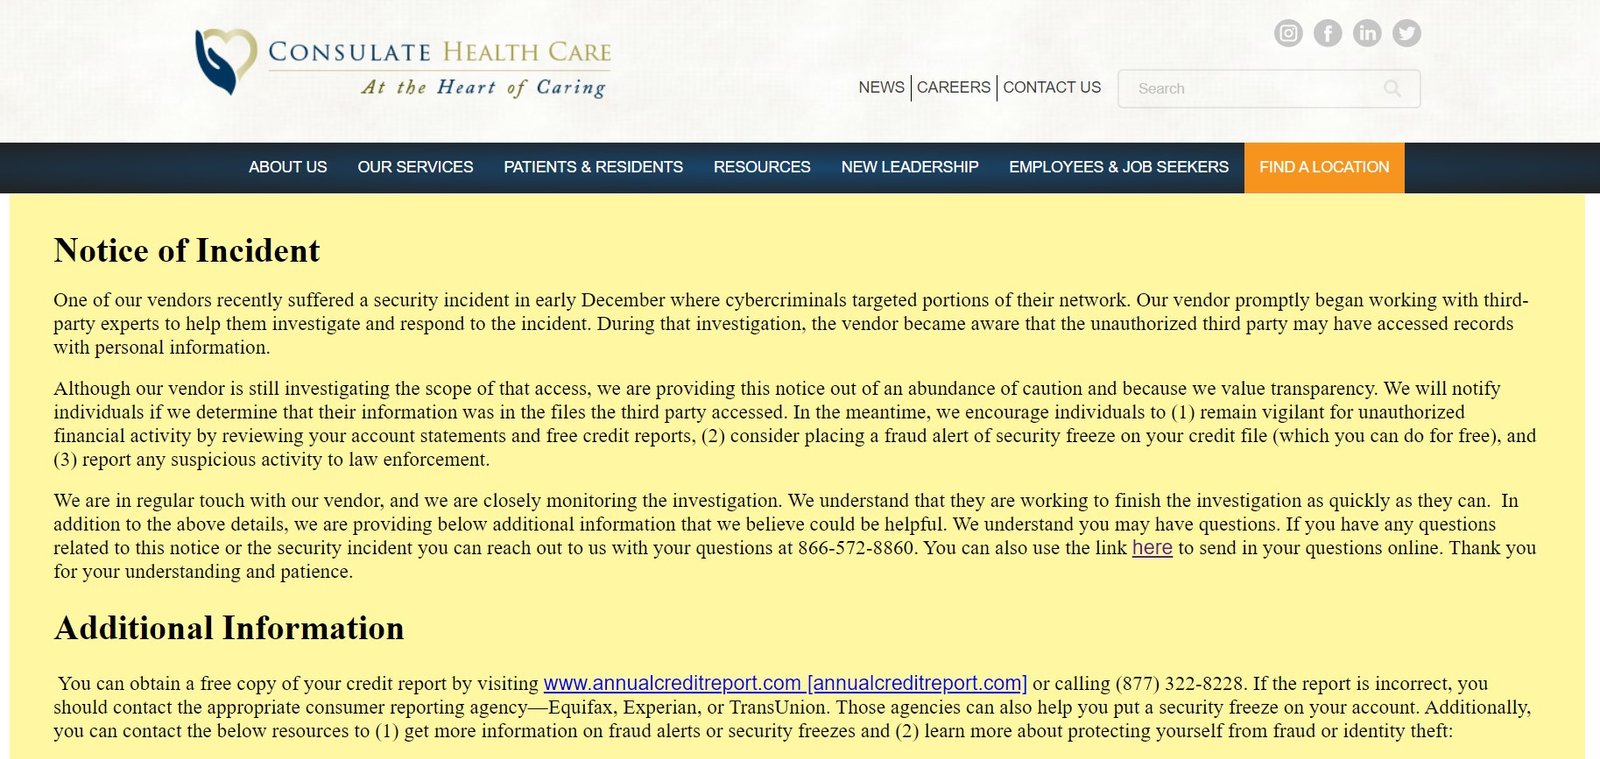 CHC announcement of an alleged December vendor breach appeared on their web site.